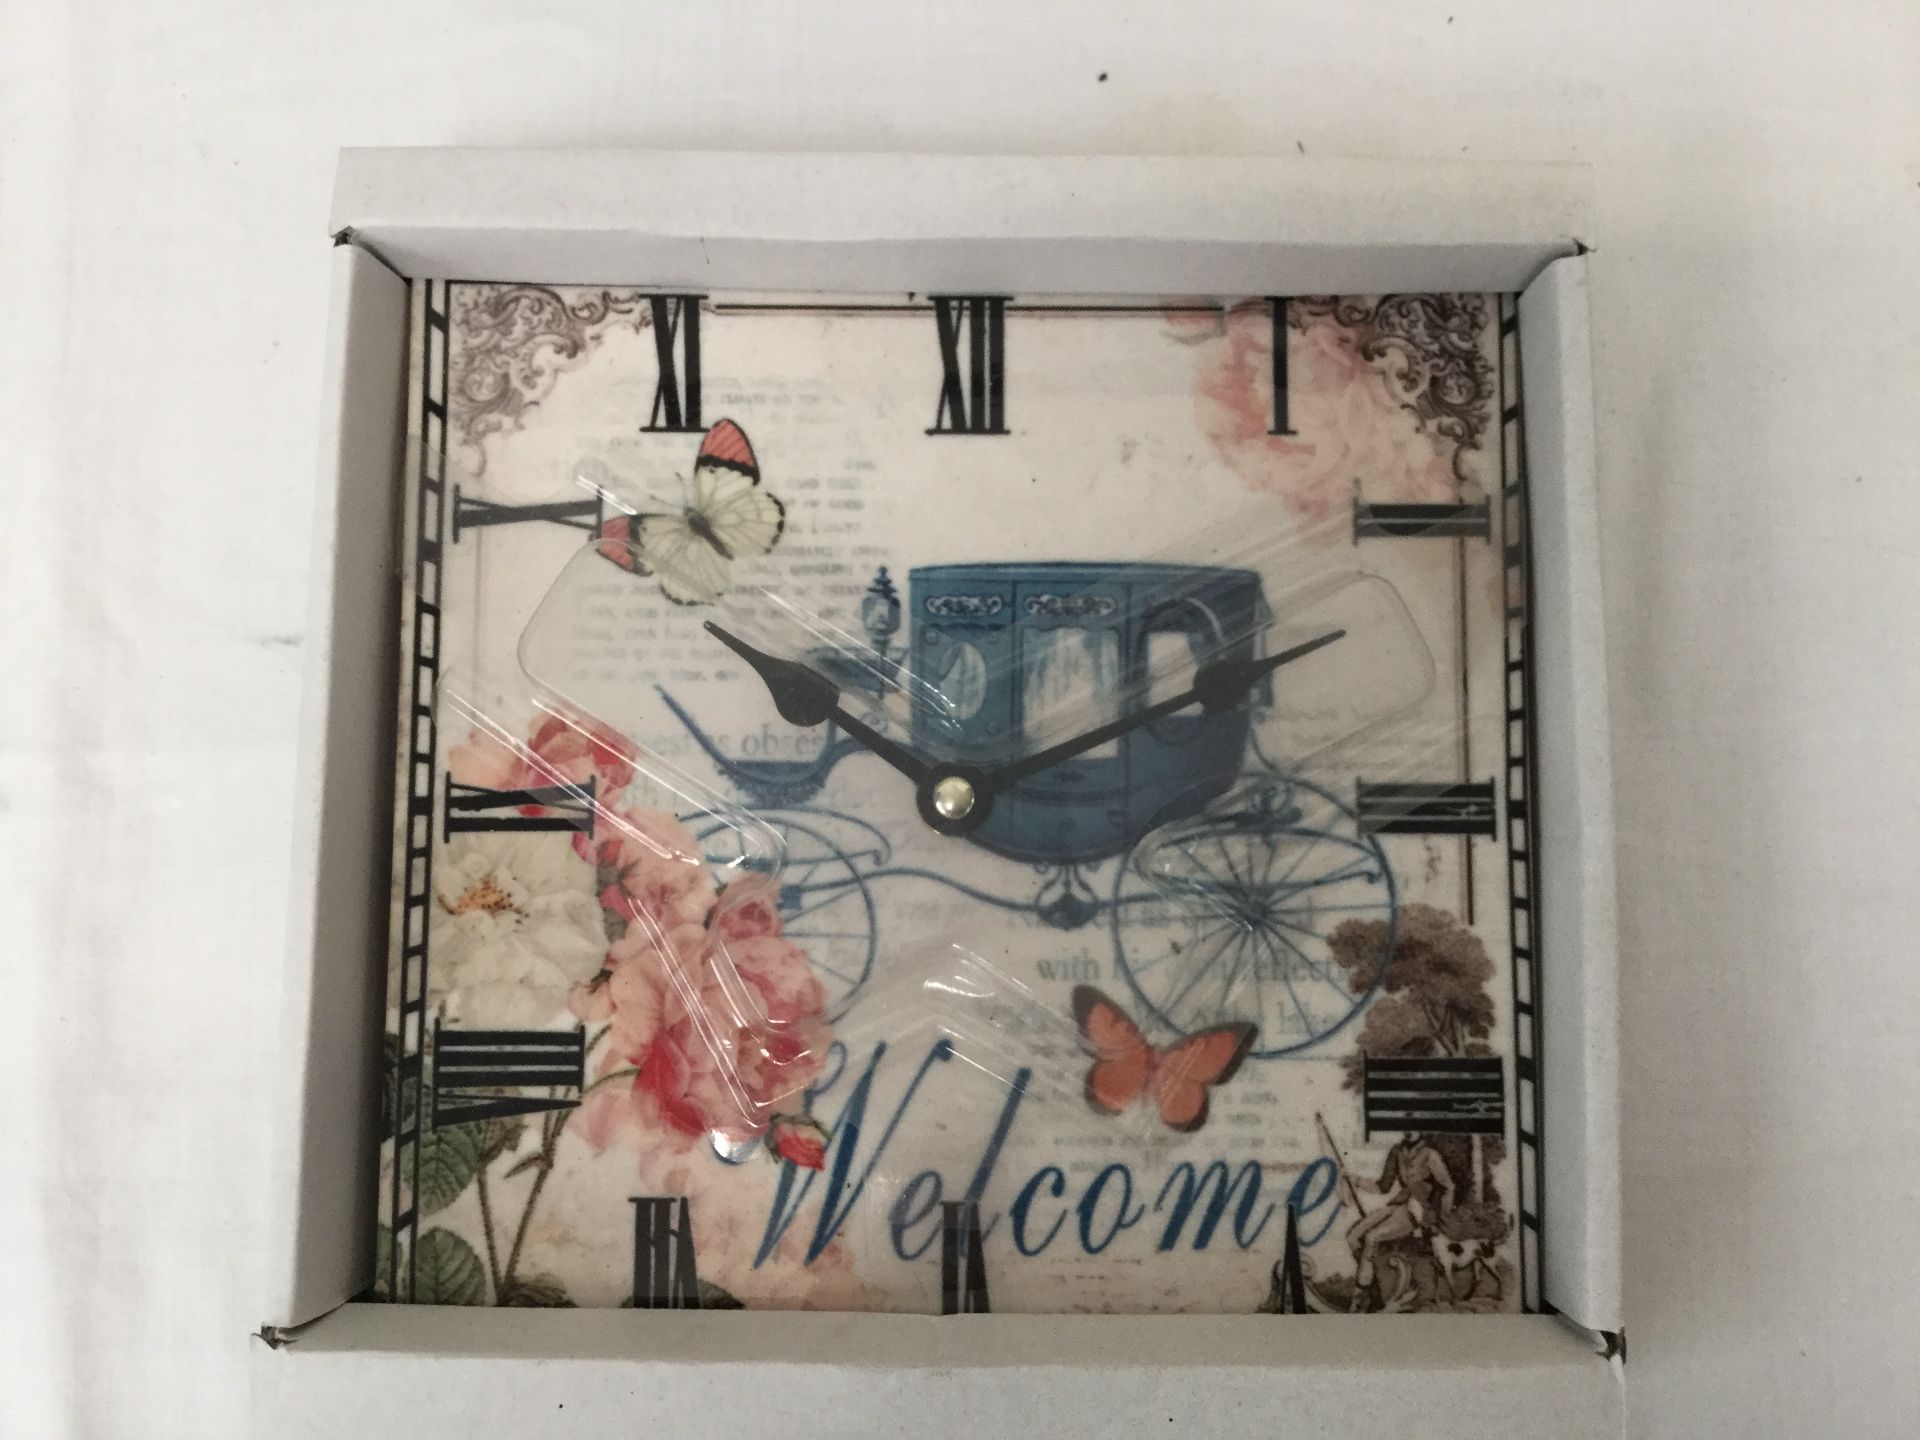 New Welcome Small Tile Wall Clock Original Packagaing